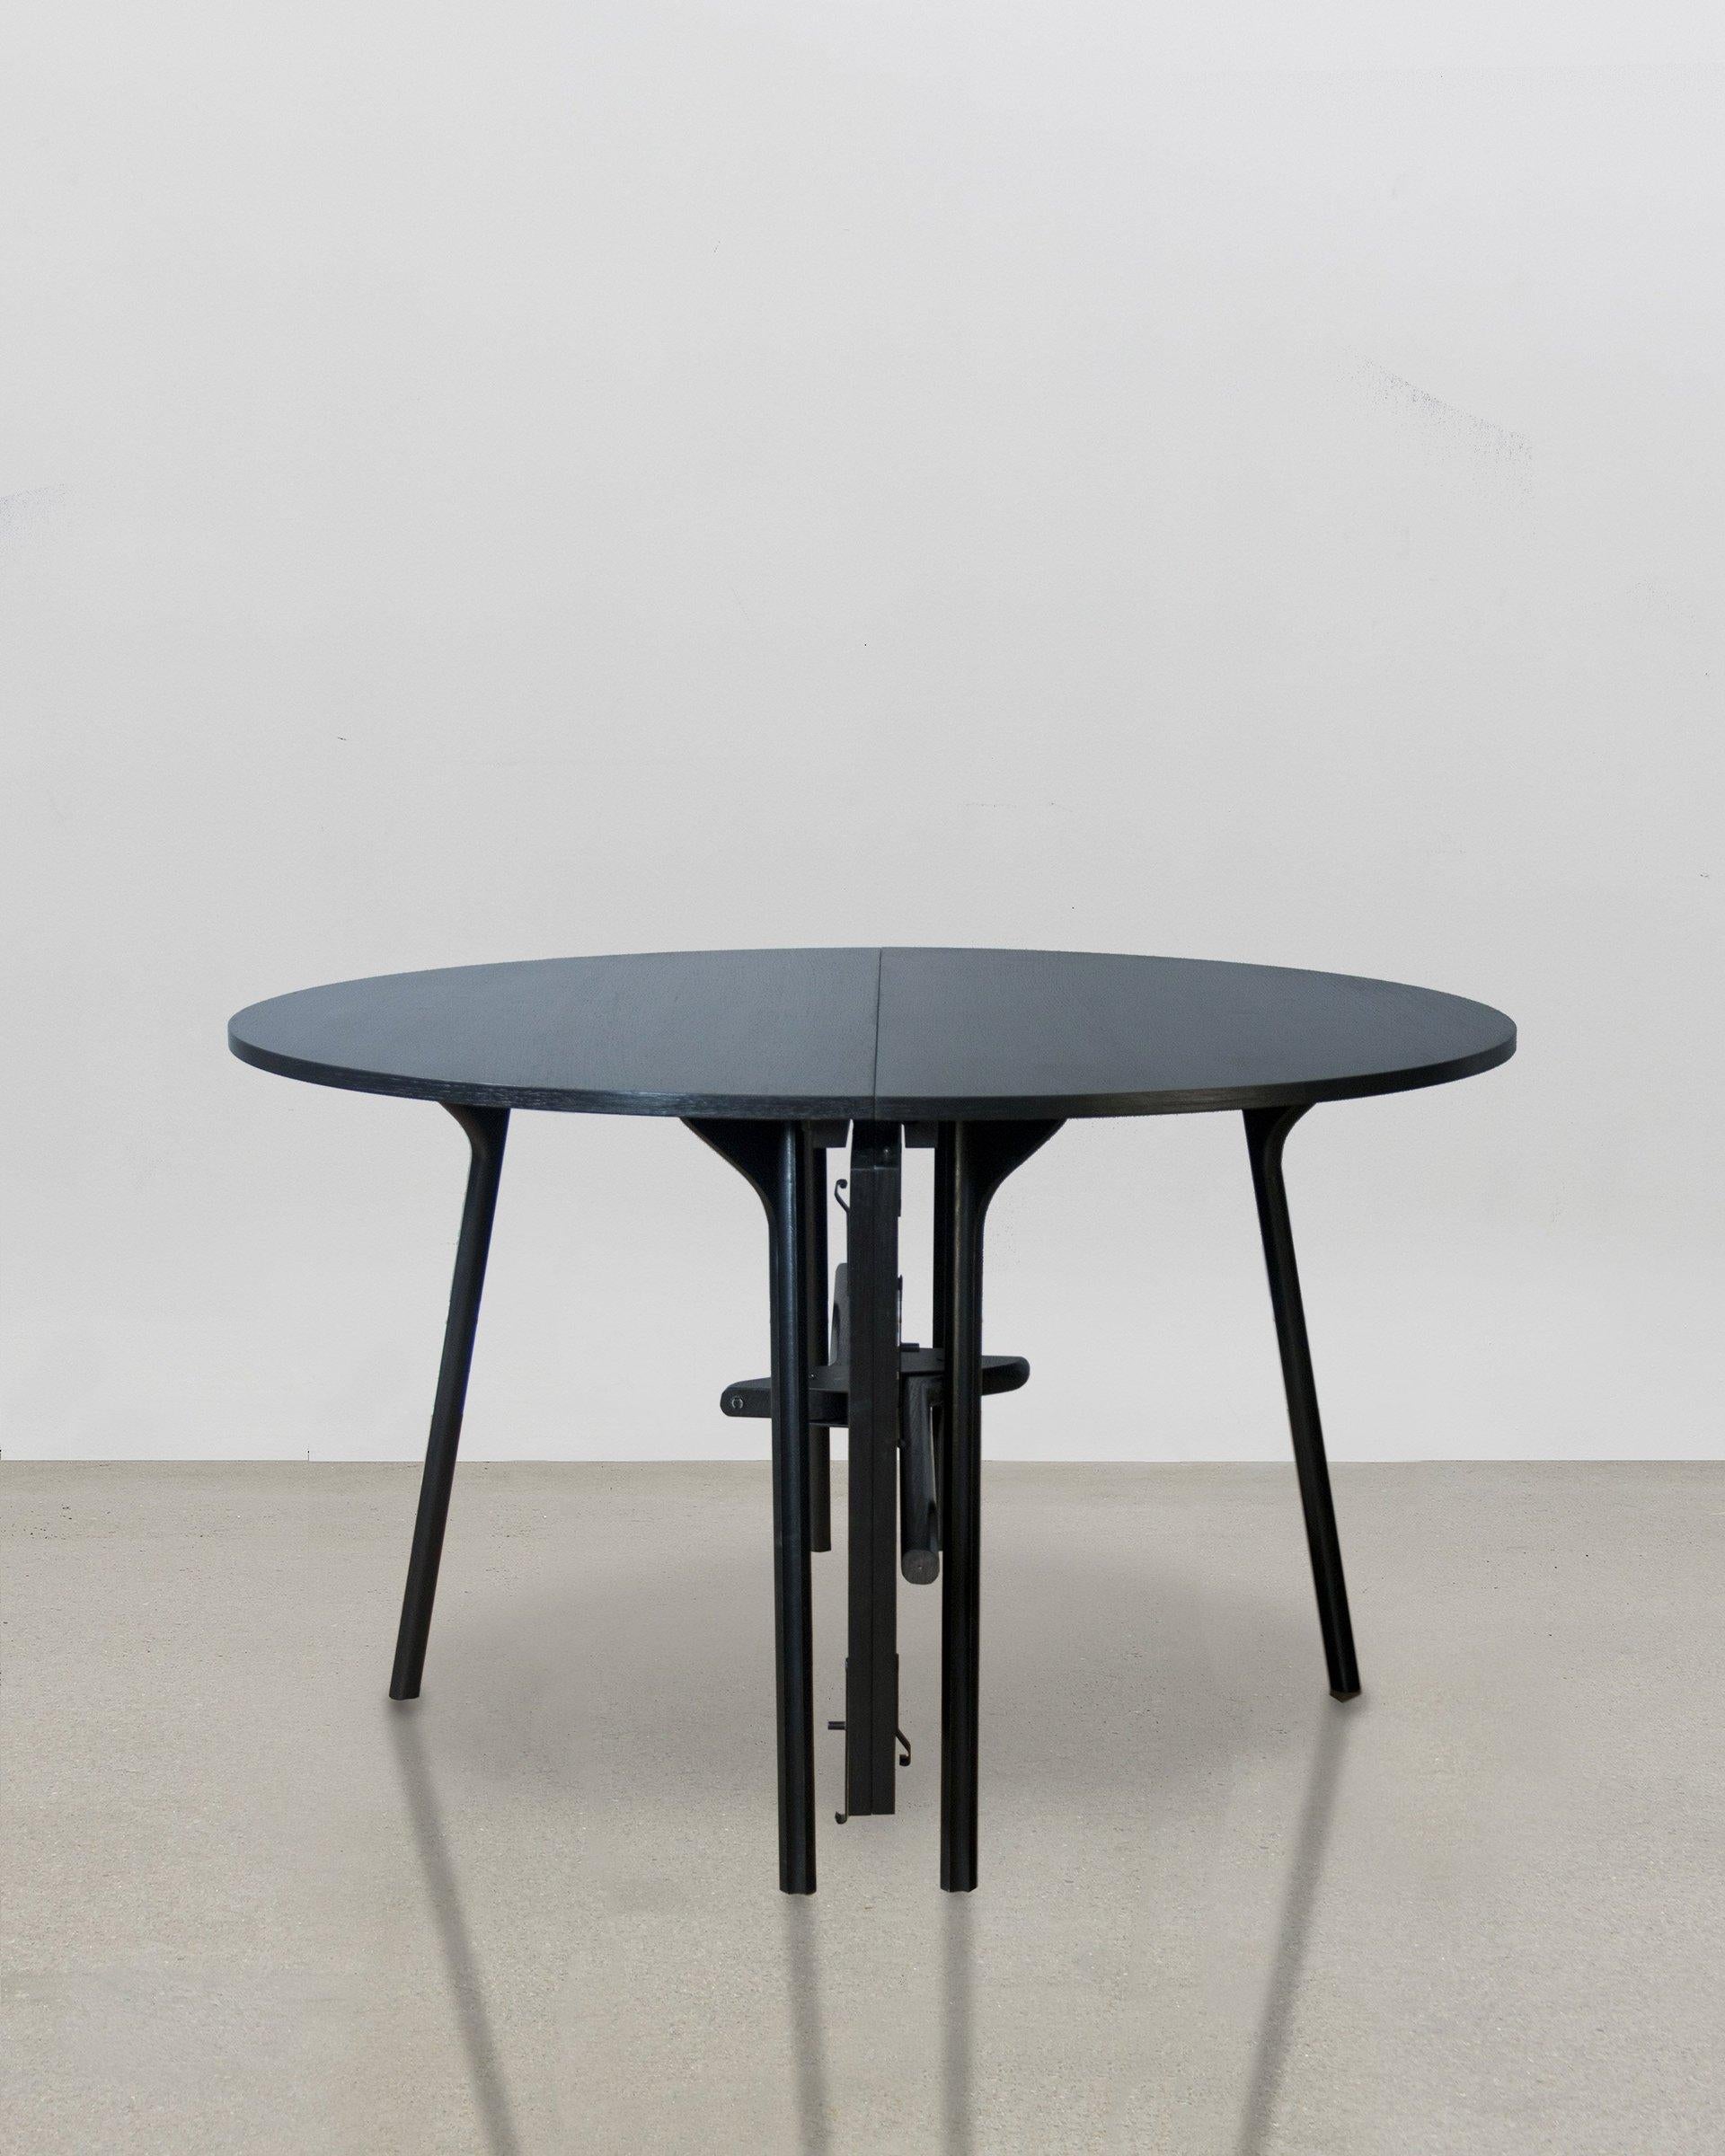 The intricately shaped legs of the PH Circle Table – inspired by the agile movement of the scarab beetle, together with the benefit of precision design and engineering – enable Poul Henningsen to design a table with the most unobtrusive of